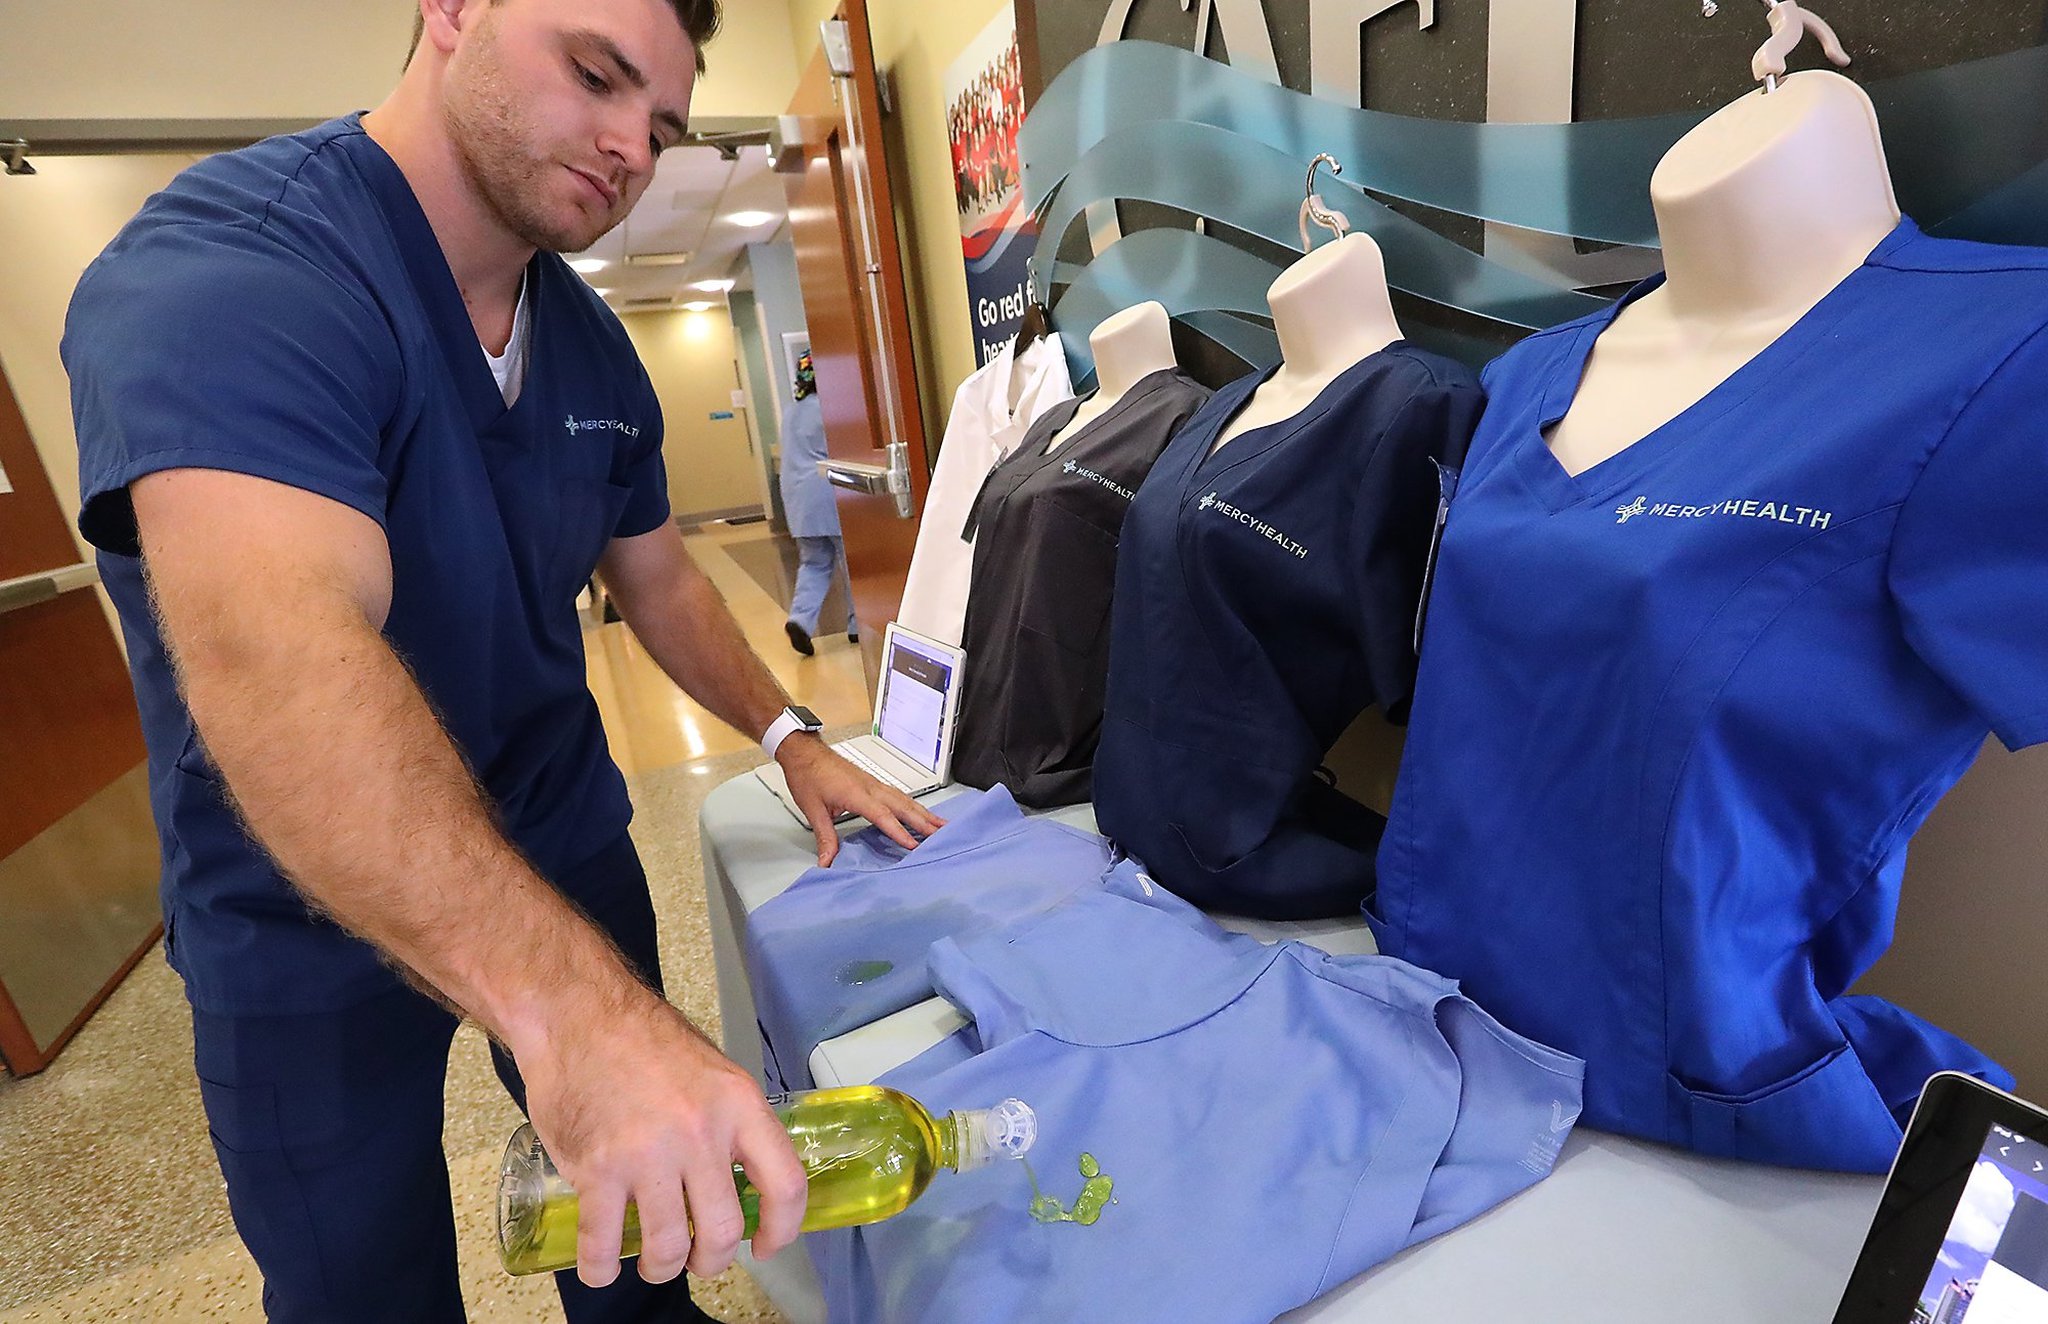 Mercy rolls out high-tech medical scrubs in Springfield